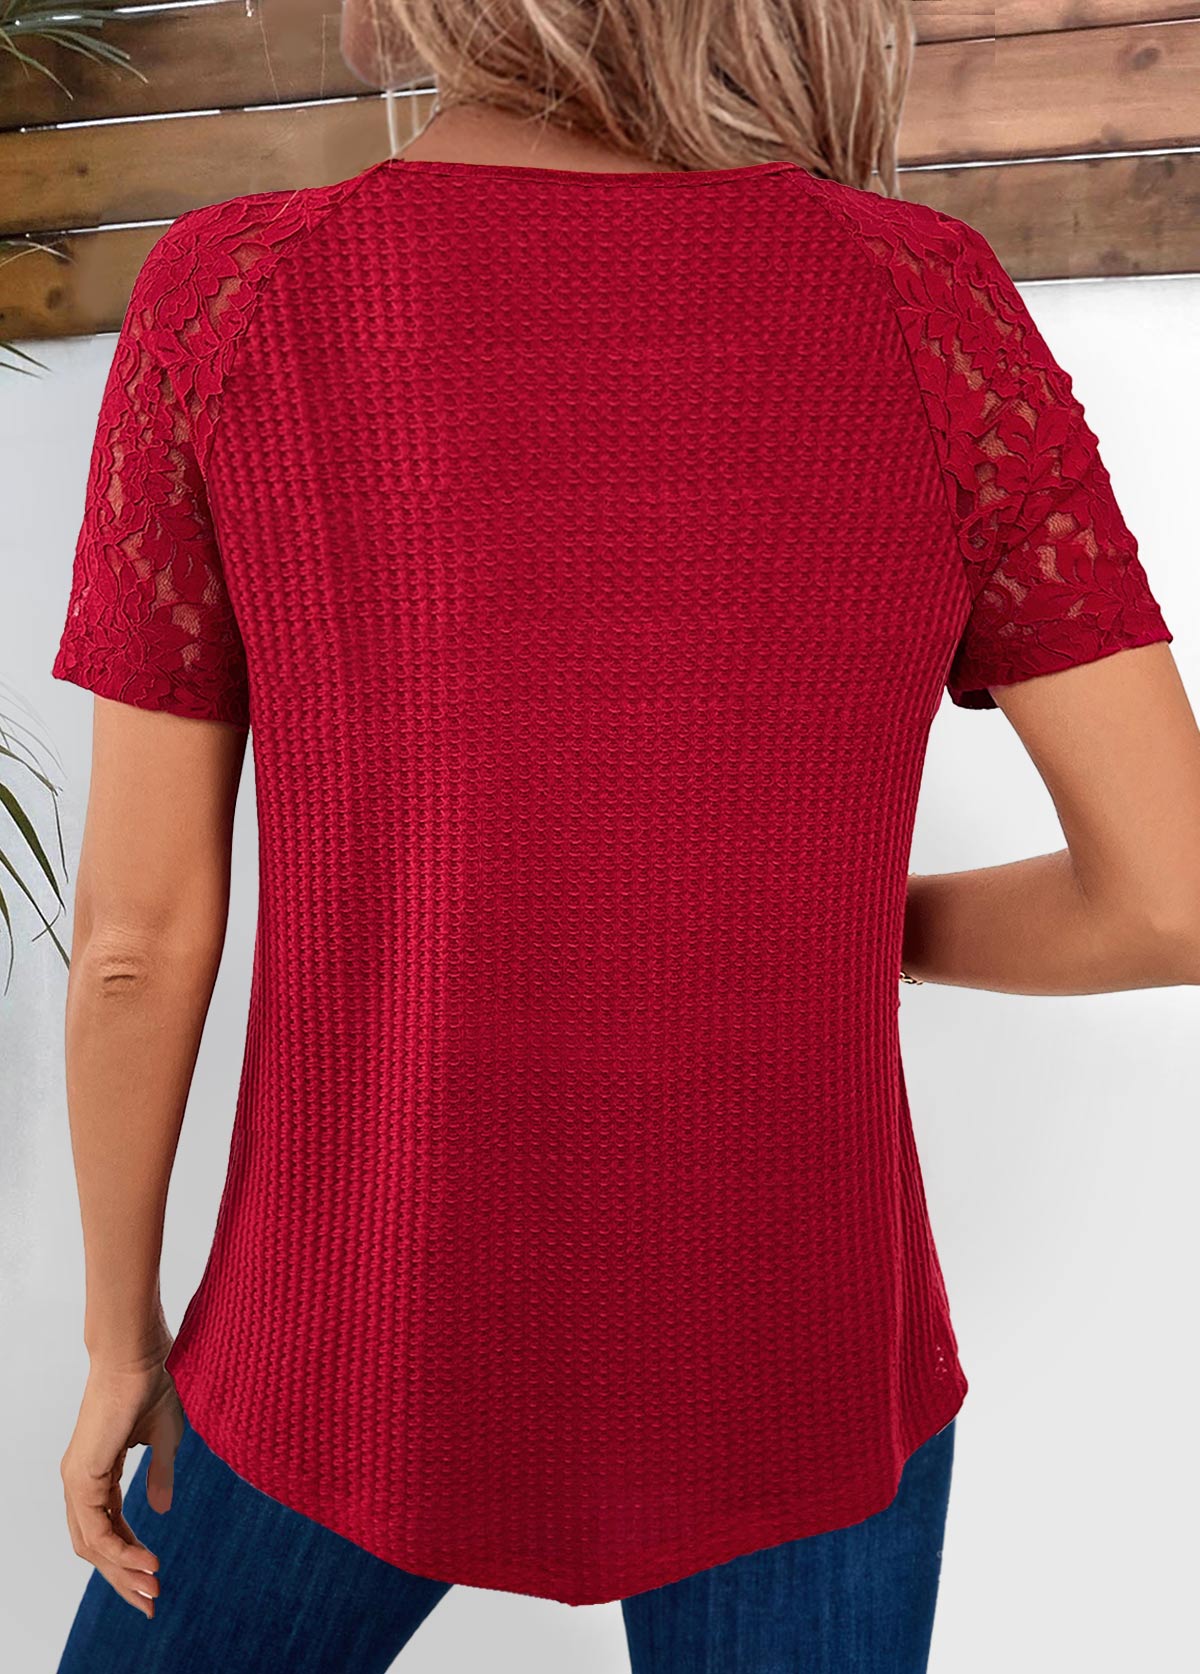 Lace Wine Red Short Sleeve V Neck T Shirt